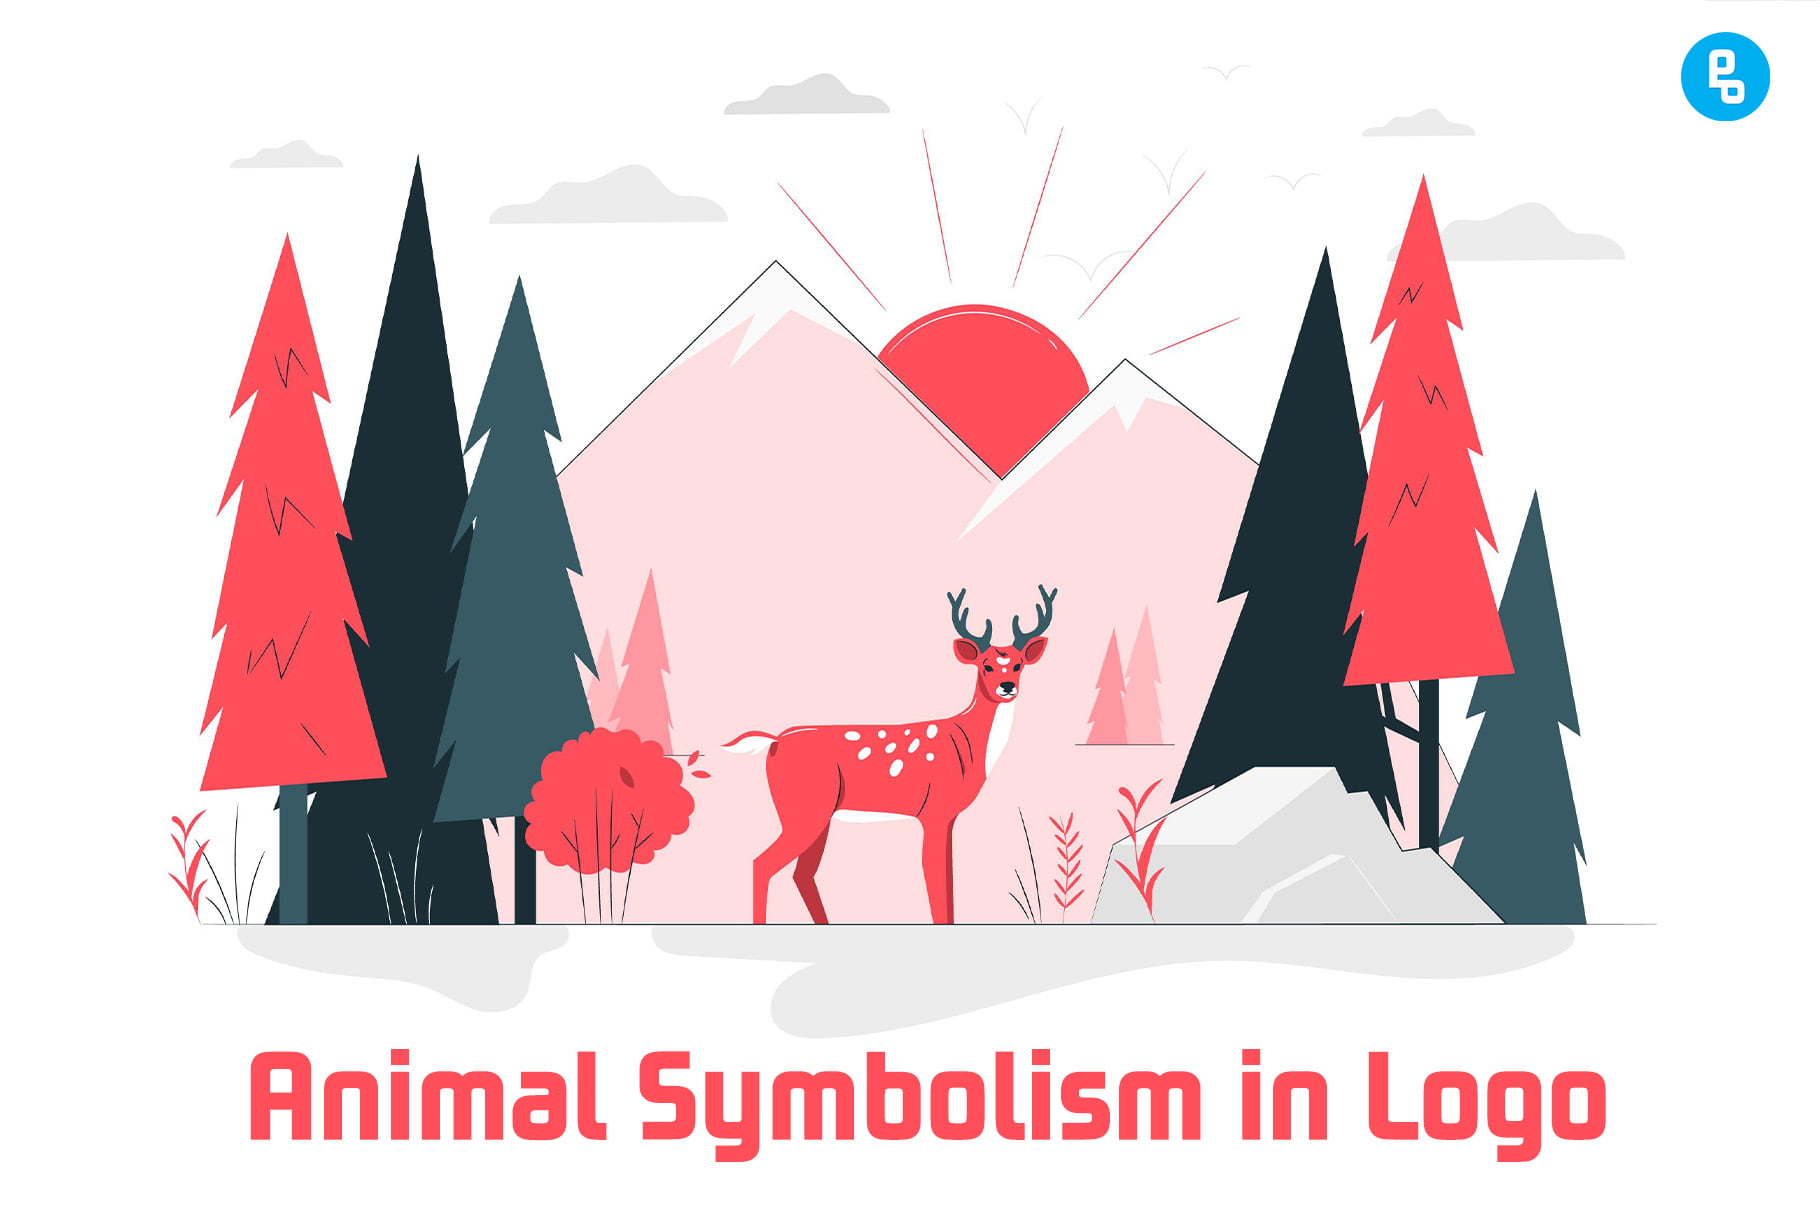 Here are some prominent companies known for their use of animal symbolism in their logos.